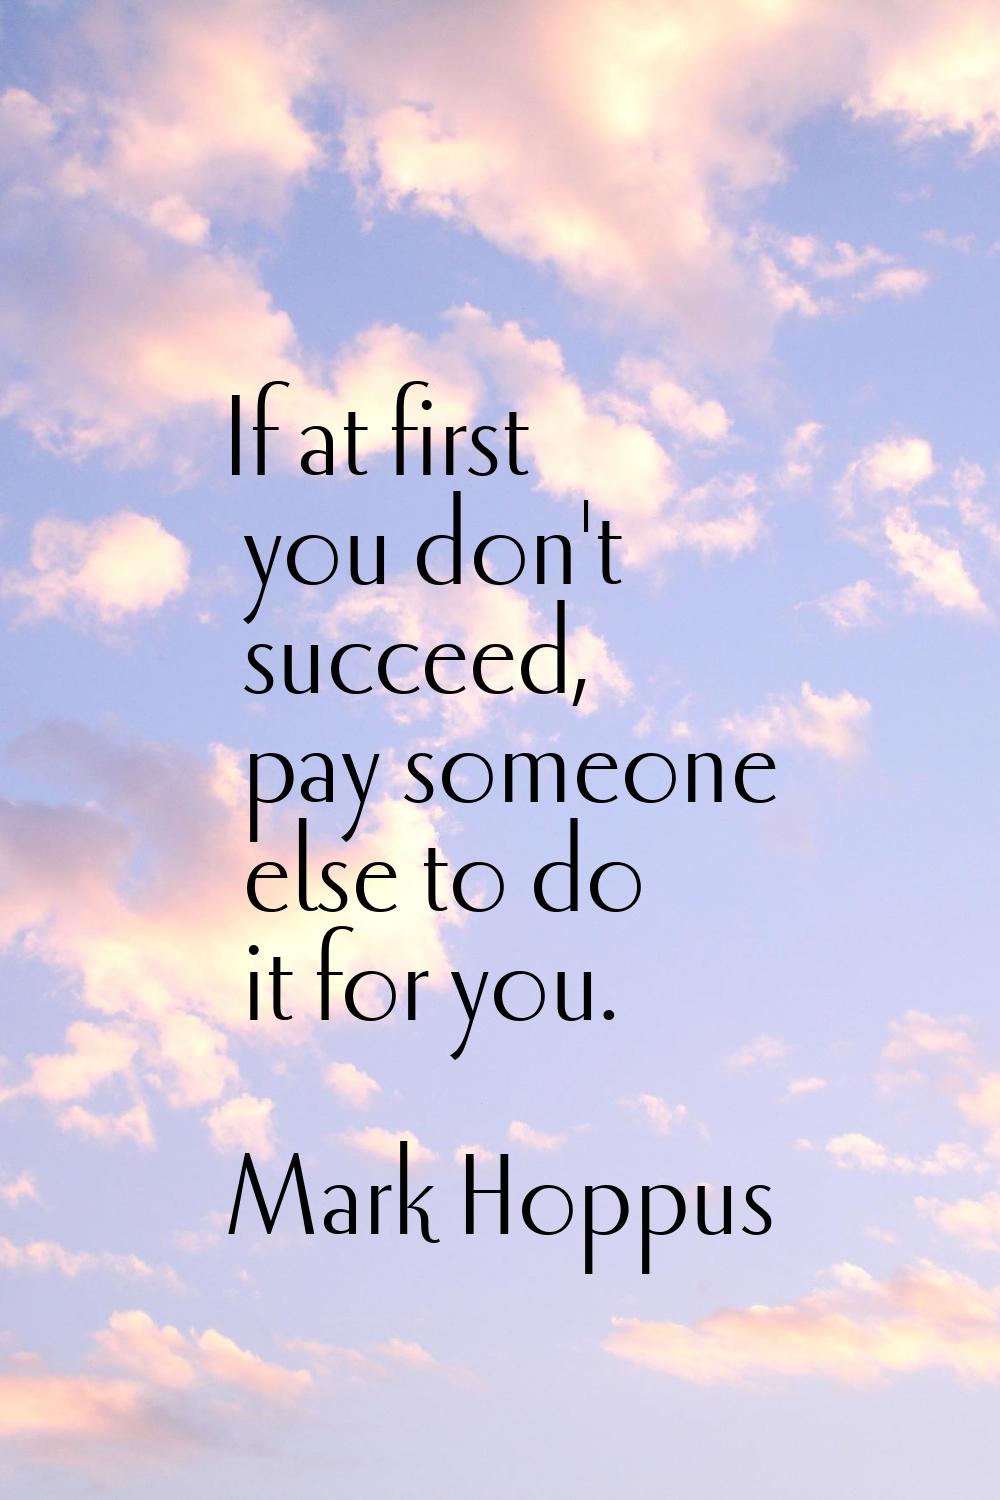 If at first you don't succeed, pay someone else to do it for you.